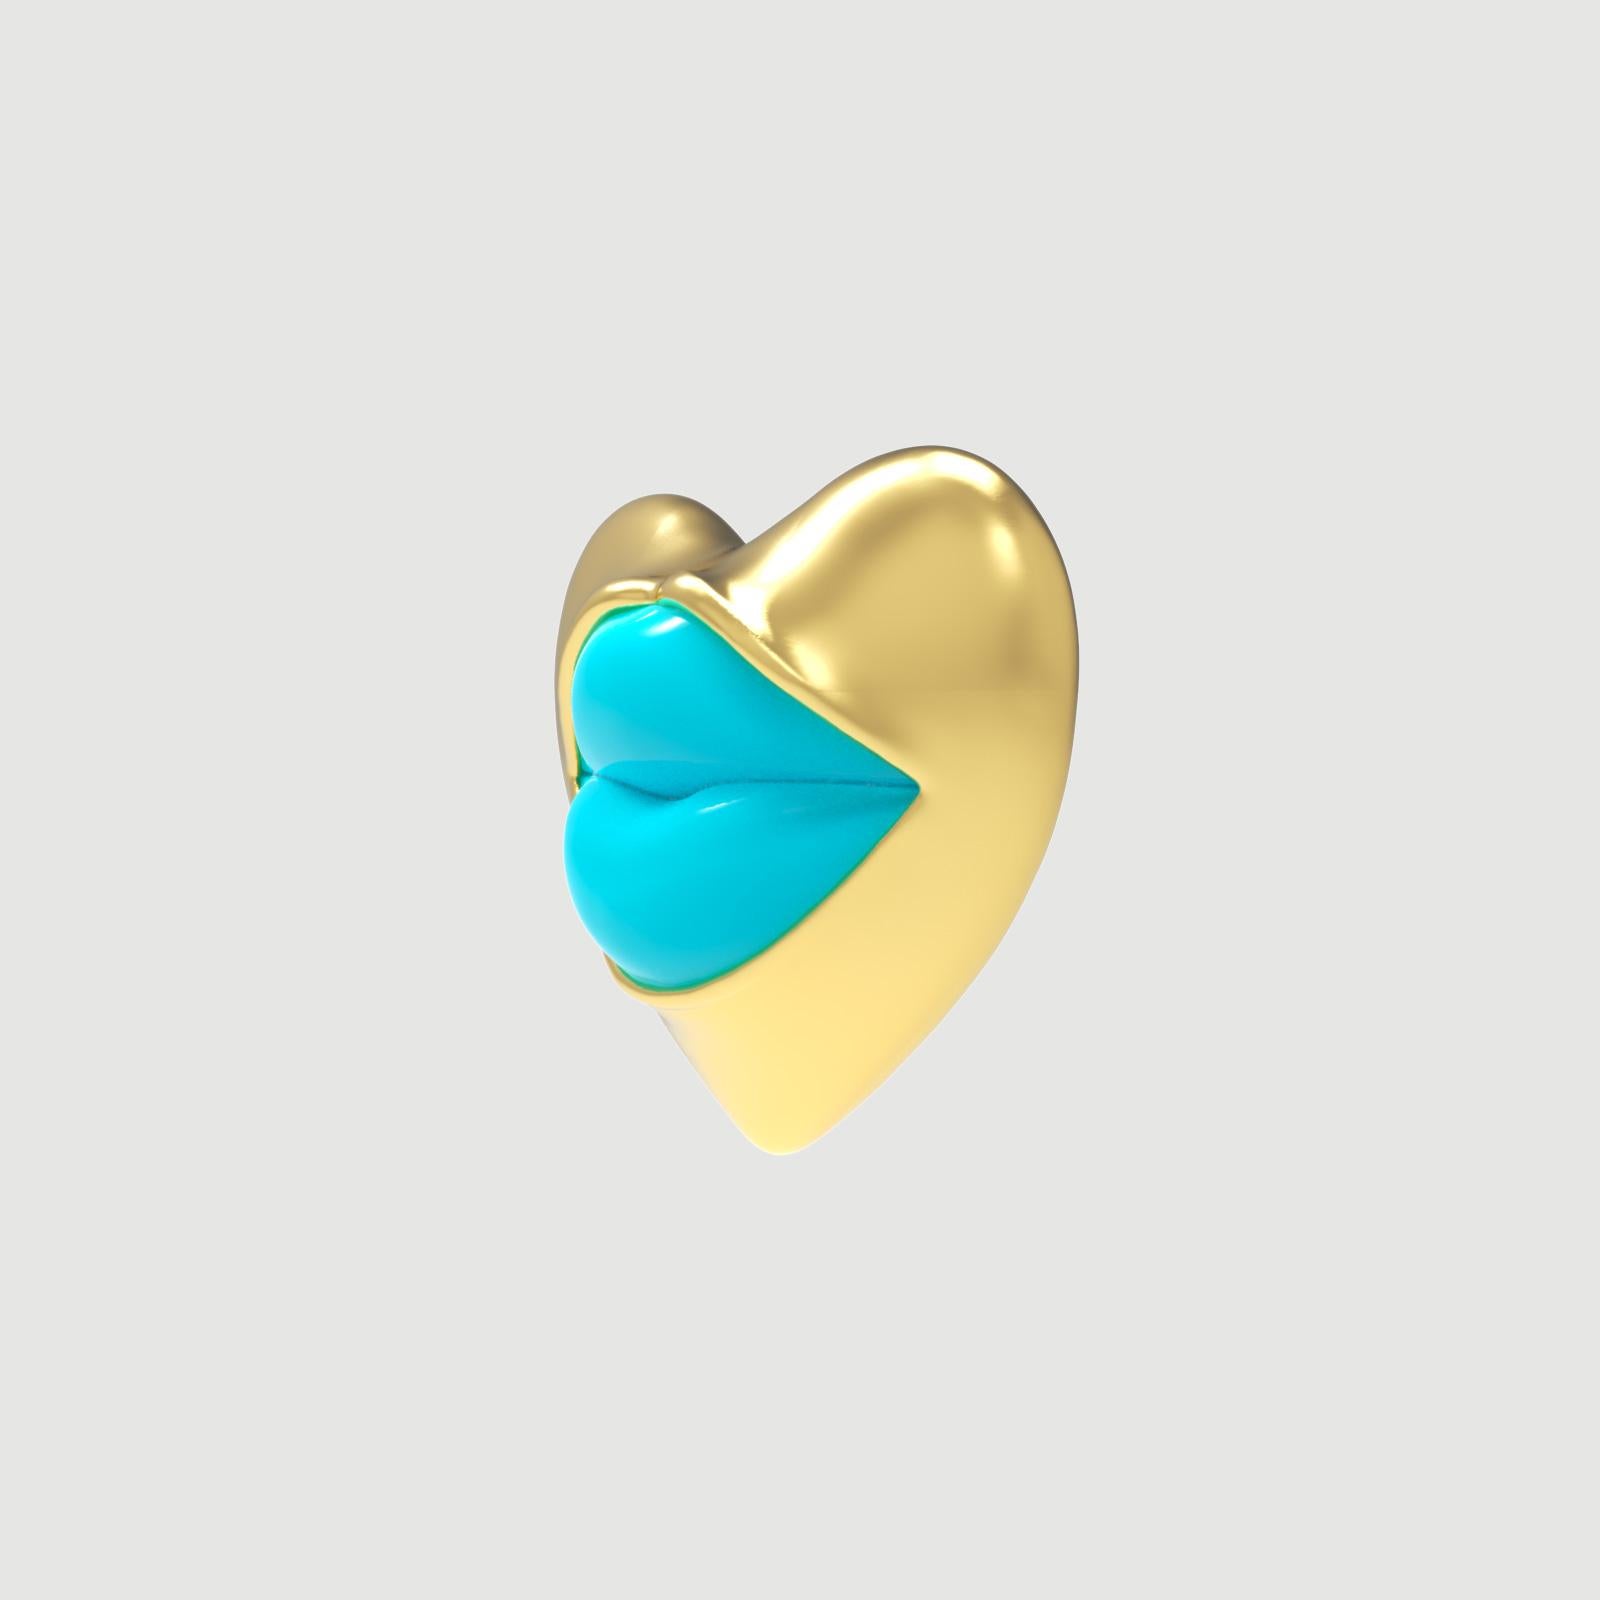 Sold as single. Pair and stack them. Please check for other colors at our store front.

Introducing our exquisite 💙 Heart-Shaped Gold Vermeil Clip-On Earring, a stunning fusion of elegance and artistry. This extraordinary jewelry design is a